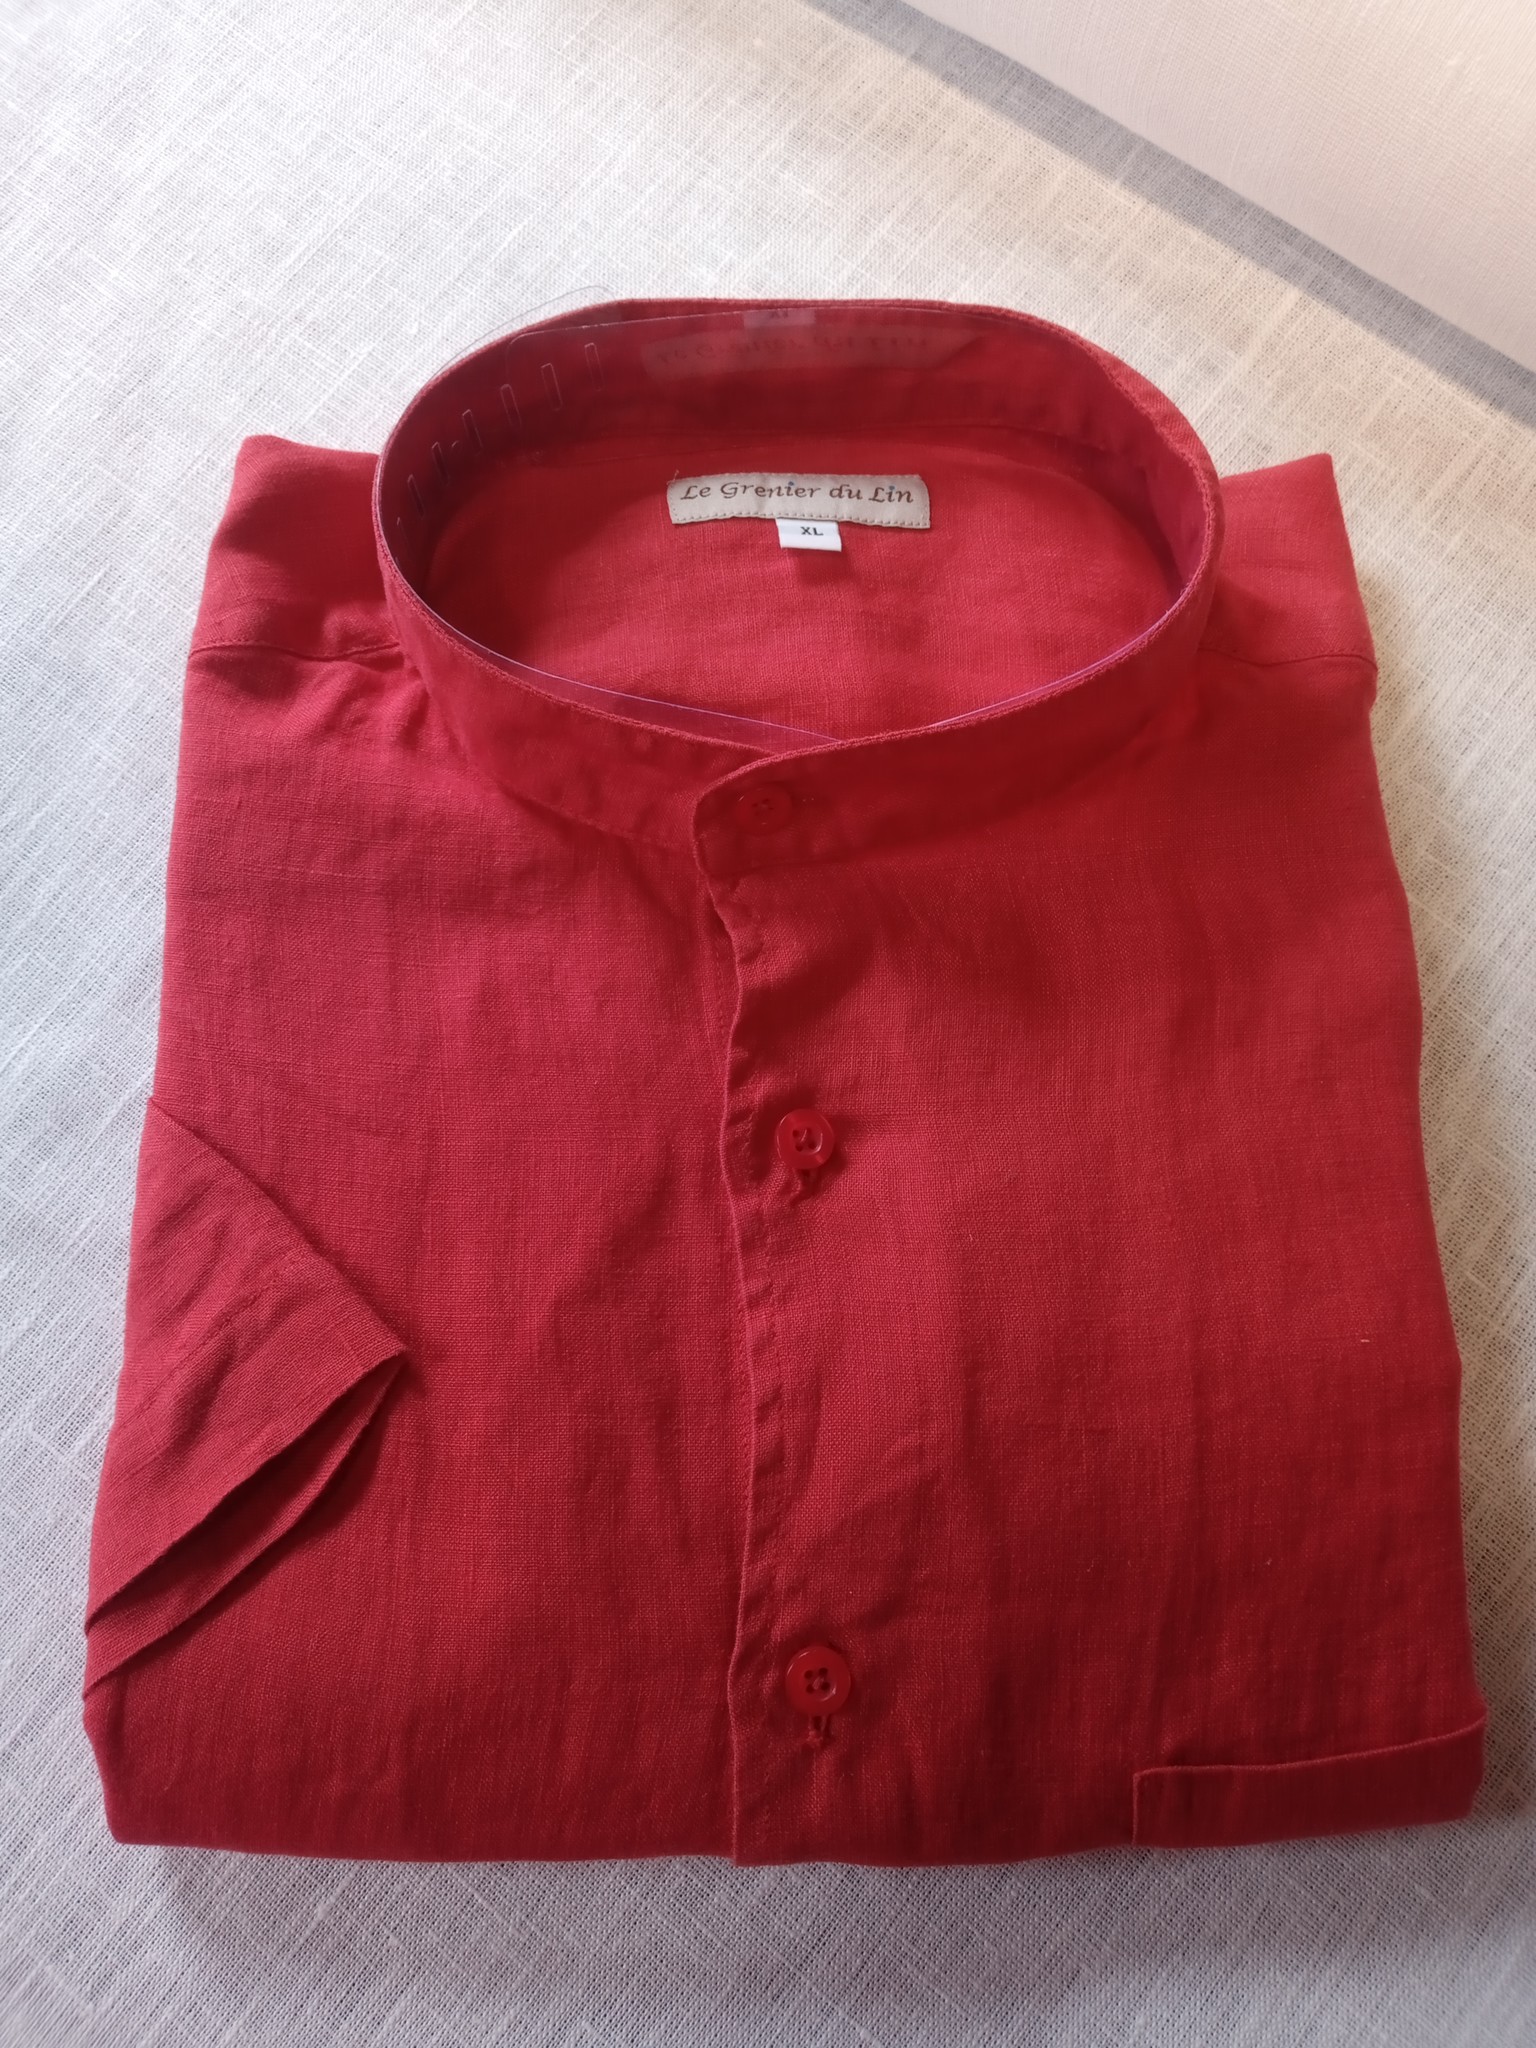 Le grenier du lin Linen shirt with short sleeves and red collar